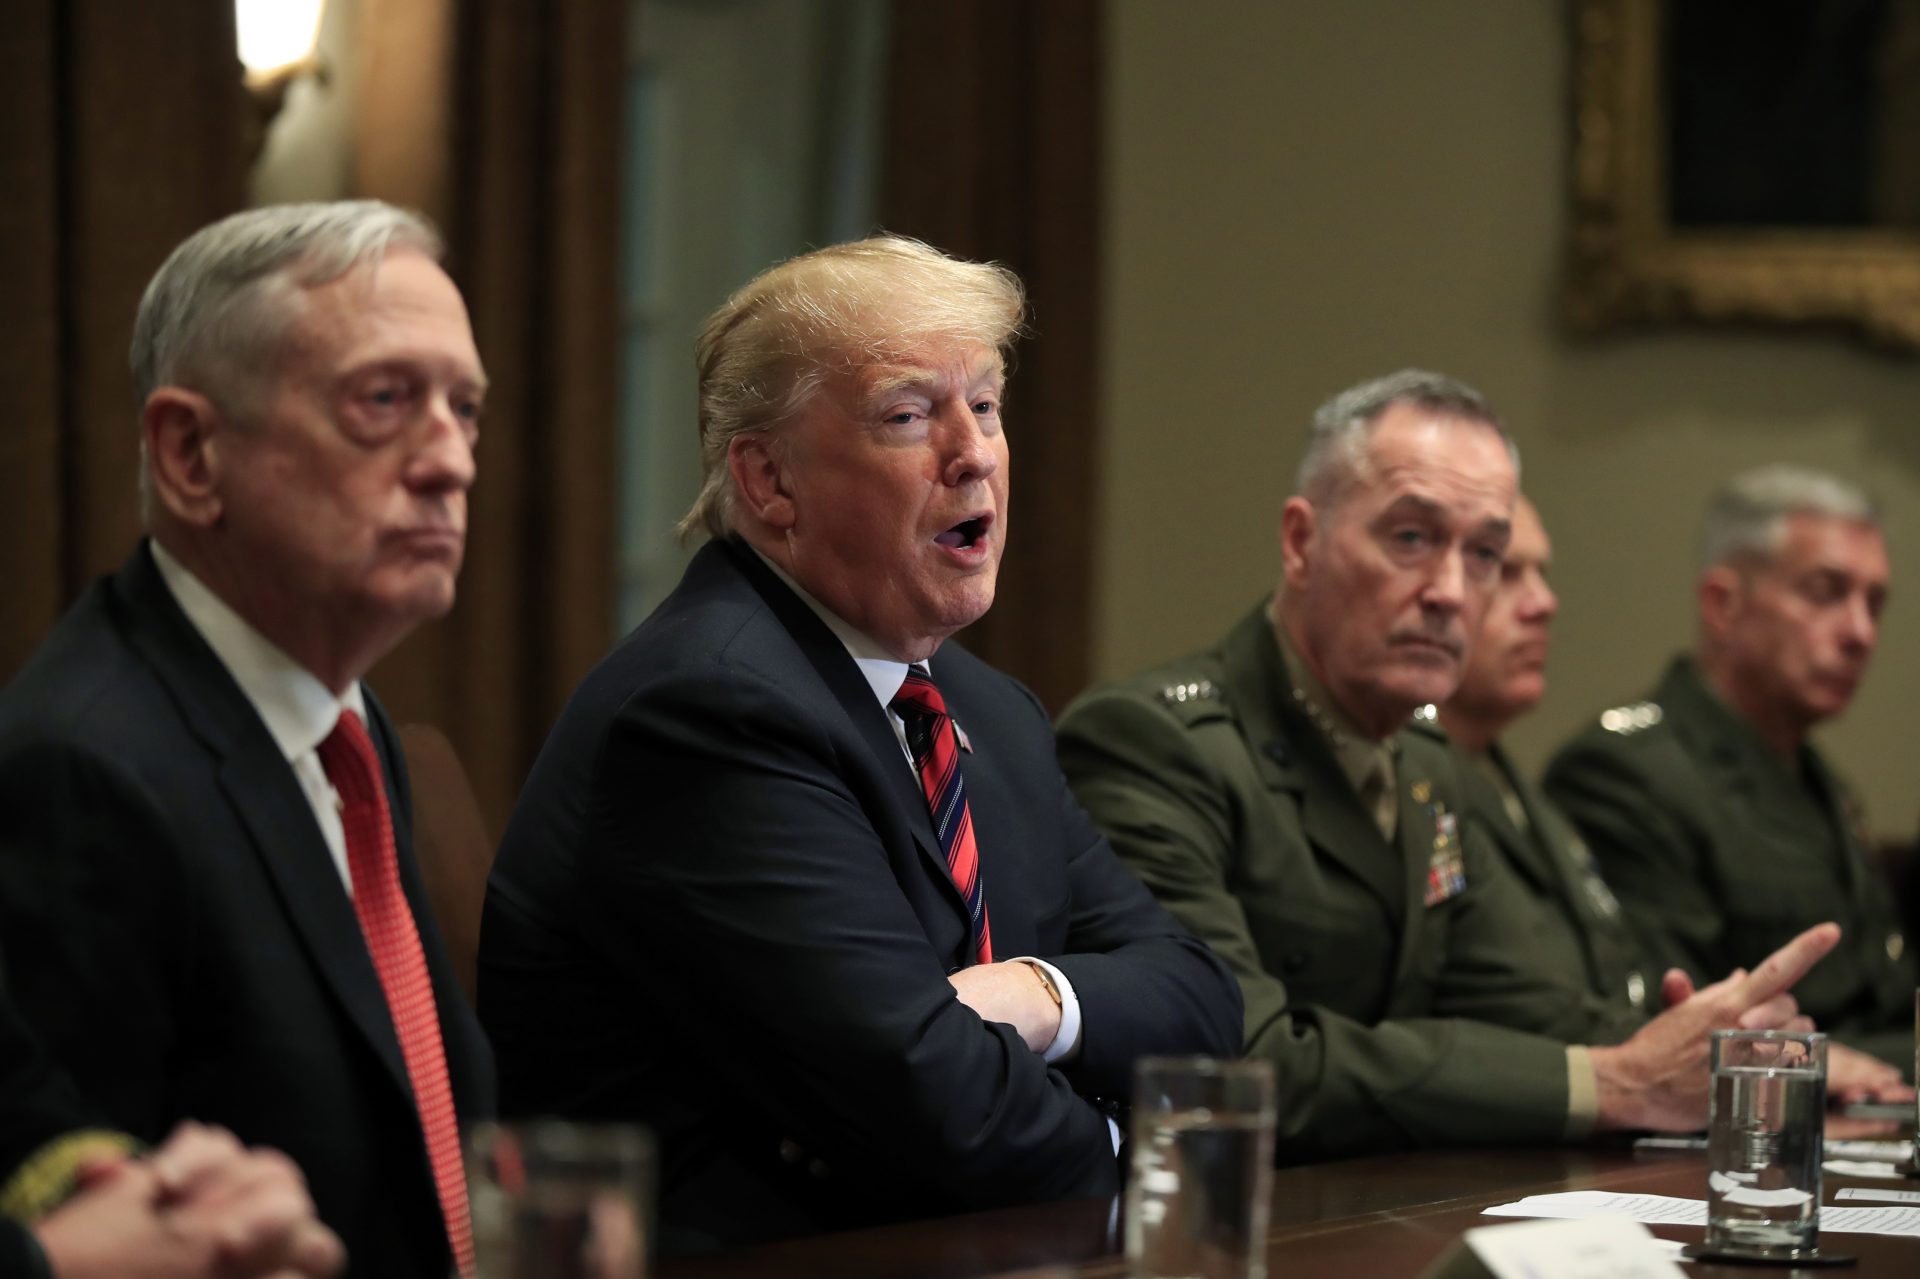 FILE PHOTO: President Donald Trump with, from left, Defense Secretary Jim Mattis, Trump, Chairman of the Joint Chiefs of Staff Gen. Joseph Dunford and Marine Corps Commandant Gen. Robert Neller, speaks during a briefing with senior military leaders in the Cabinet Room at the White House in Washington, Tuesday, Oct. 23, 2018.